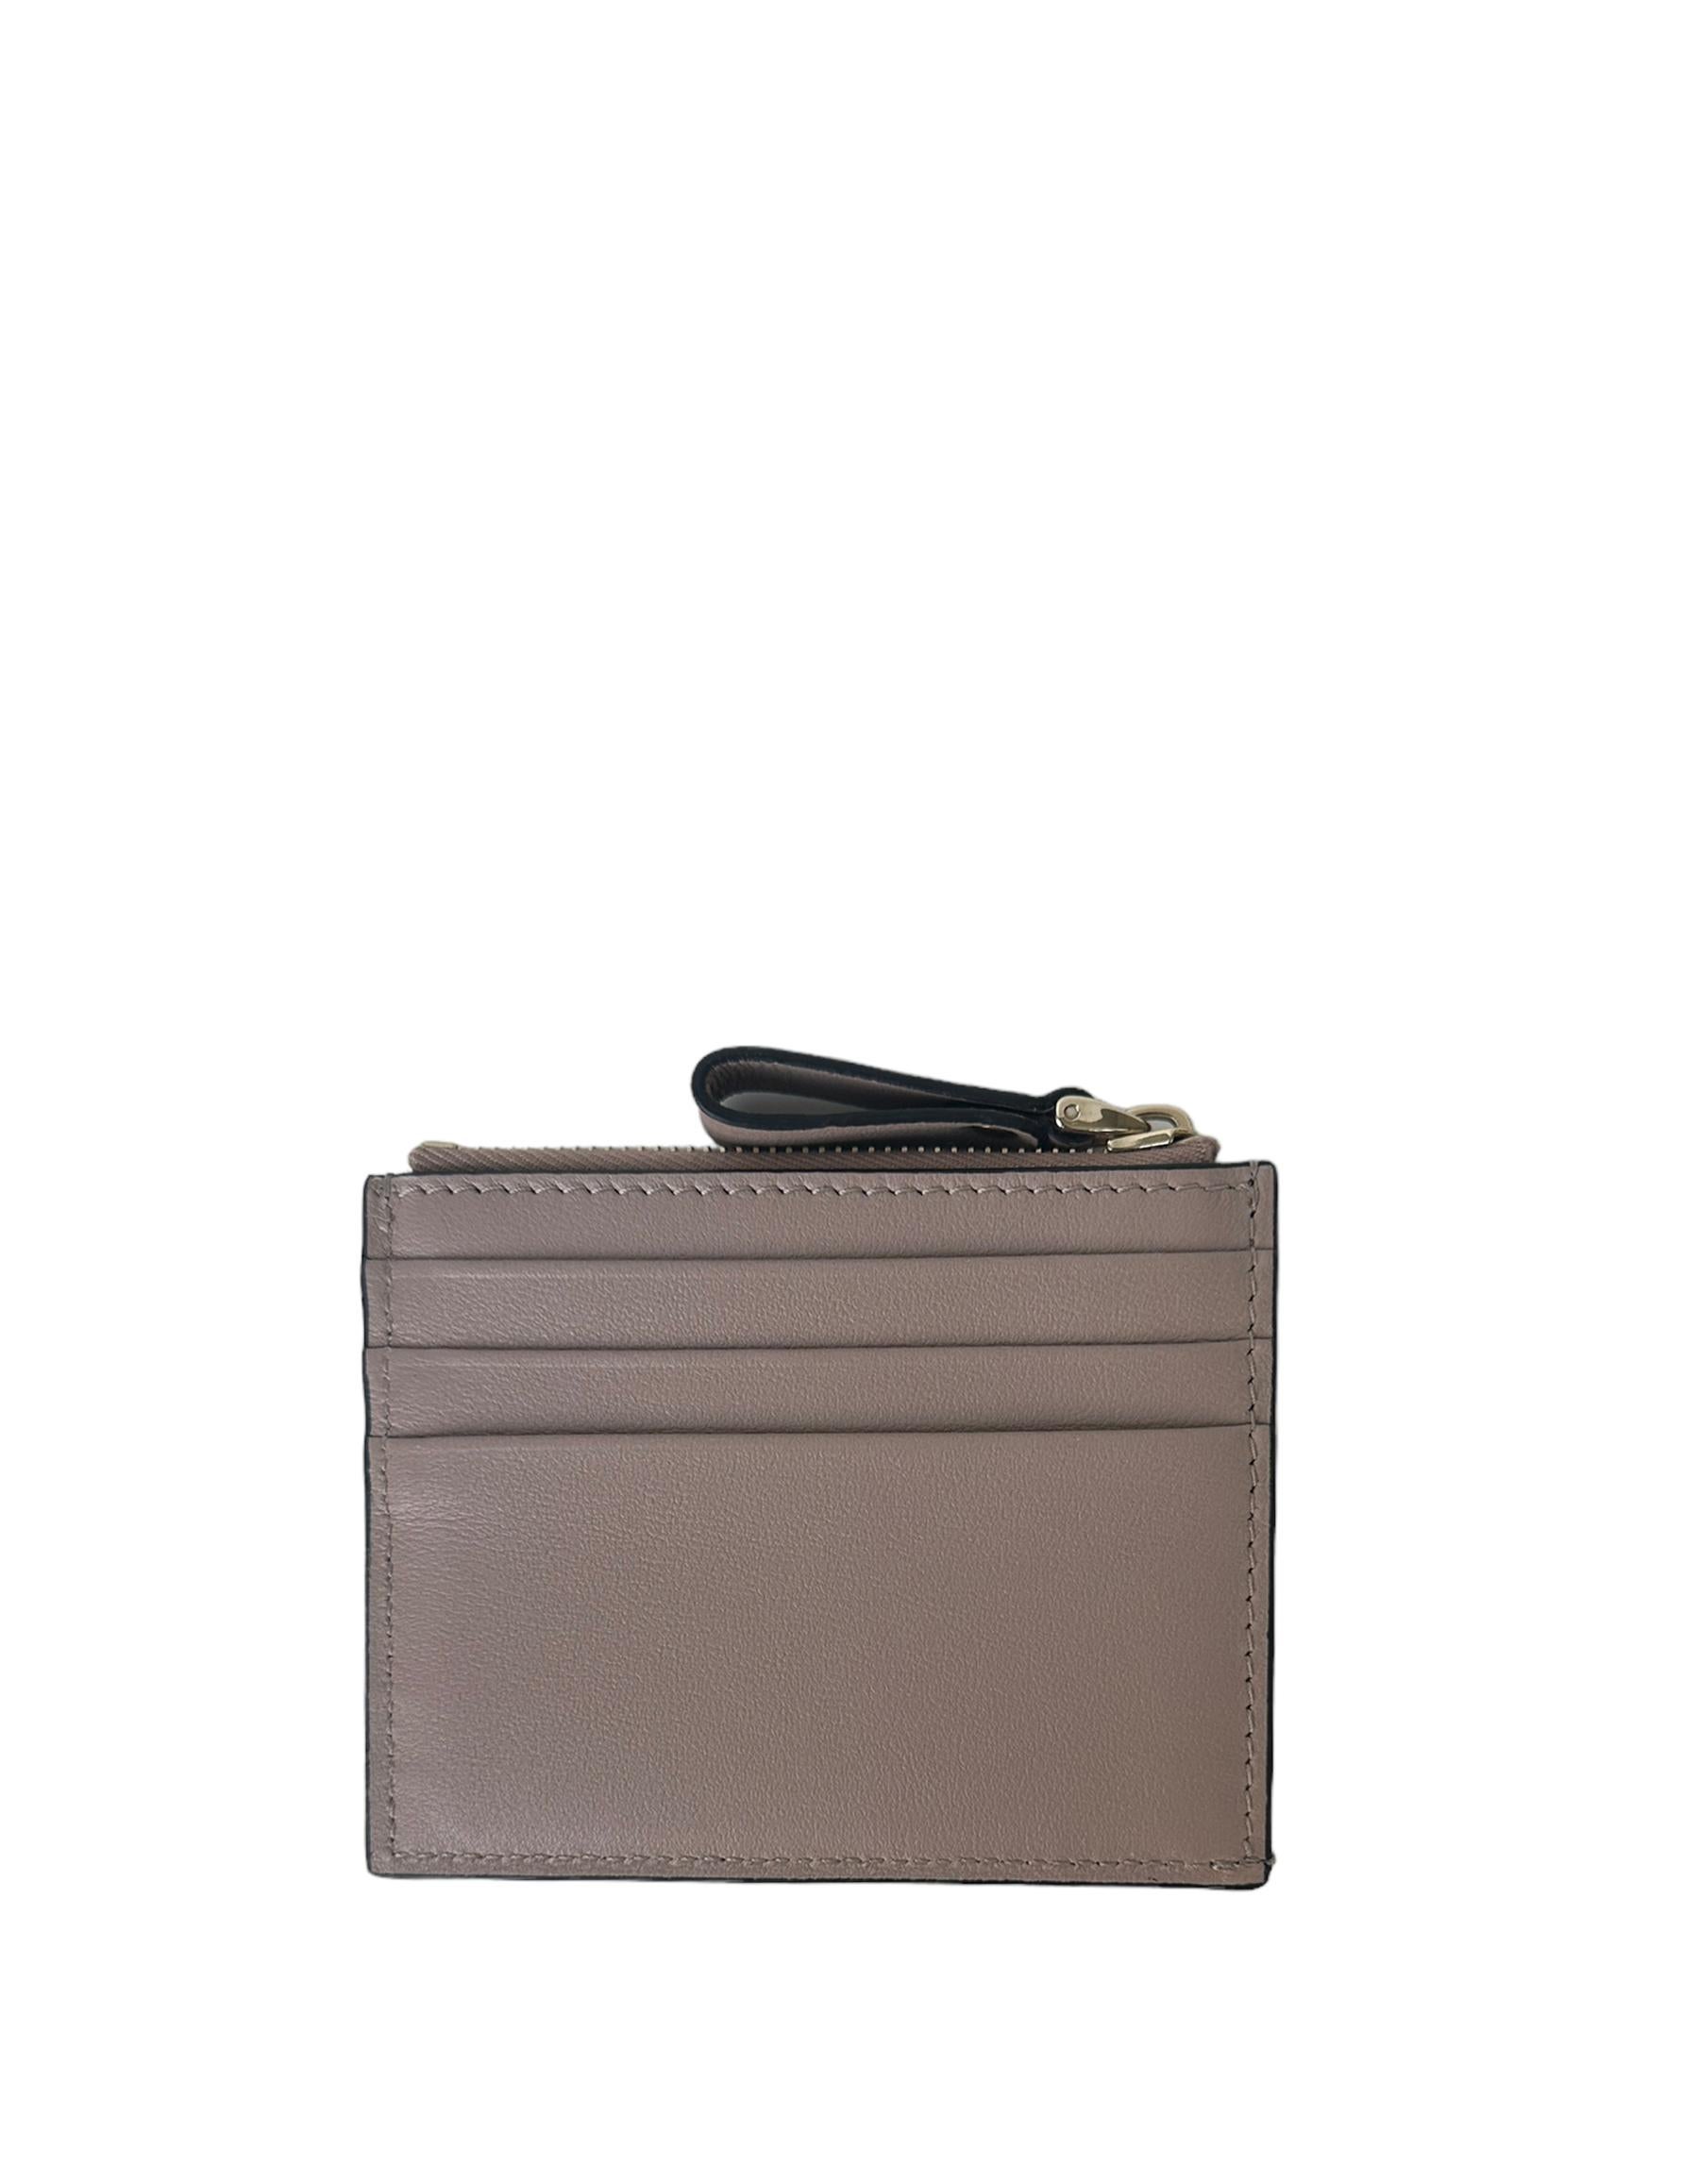 Valentino Beige Rockstud Zip Leather Card Case 

Made In: Italy
Color: Beige
Hardware: Goldtone
Materials: Leather
Lining: Canvas
Closure/Opening: Zip top
Exterior Pockets: Six credit card slots
Interior Pockets: One zip coin pocket
Exterior